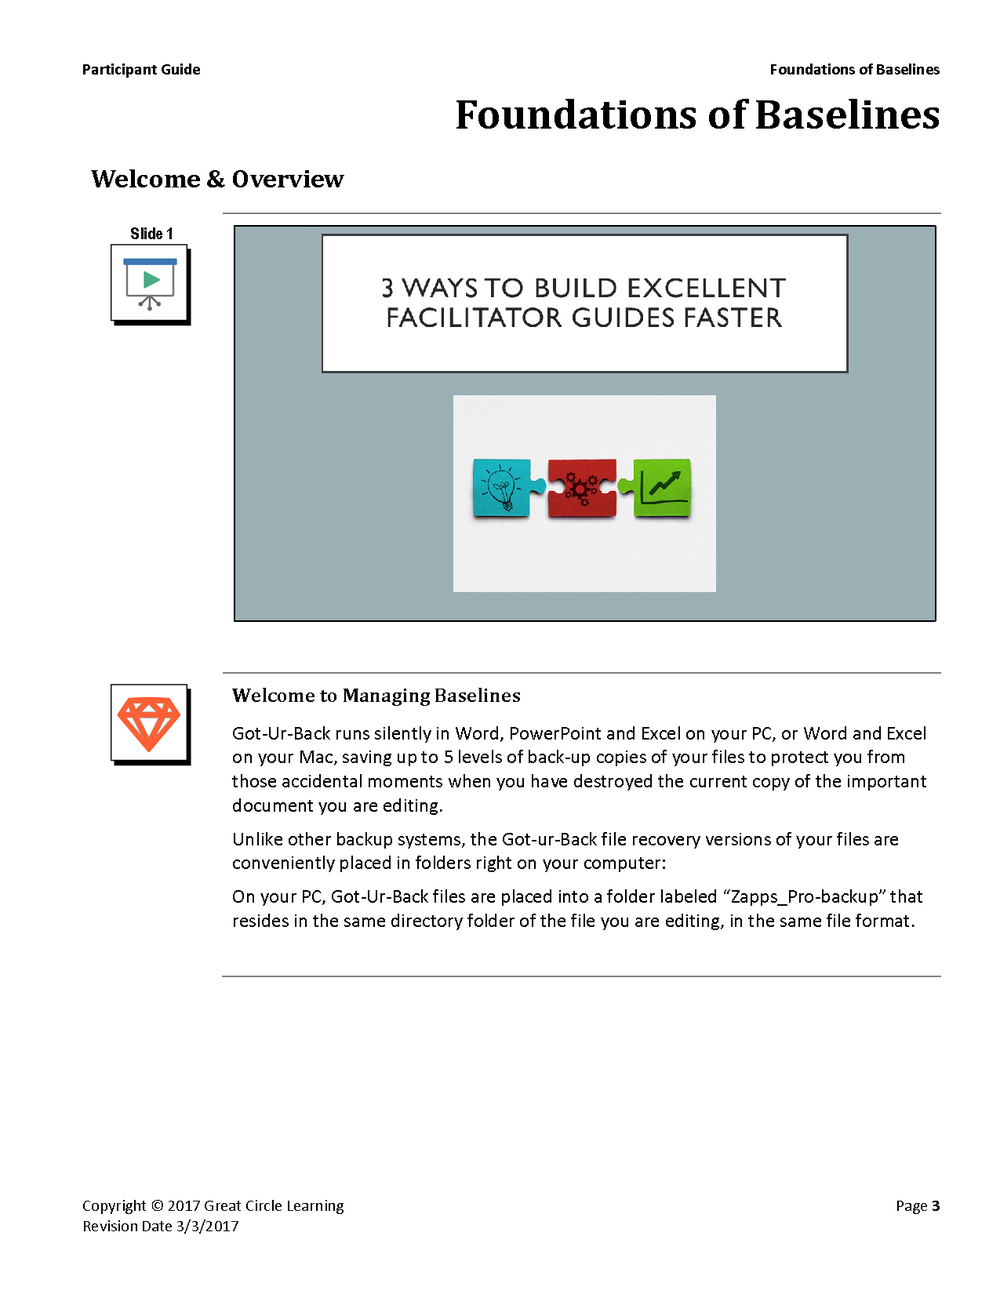 microsoft-templates-participant-guide-download-free-storyposts